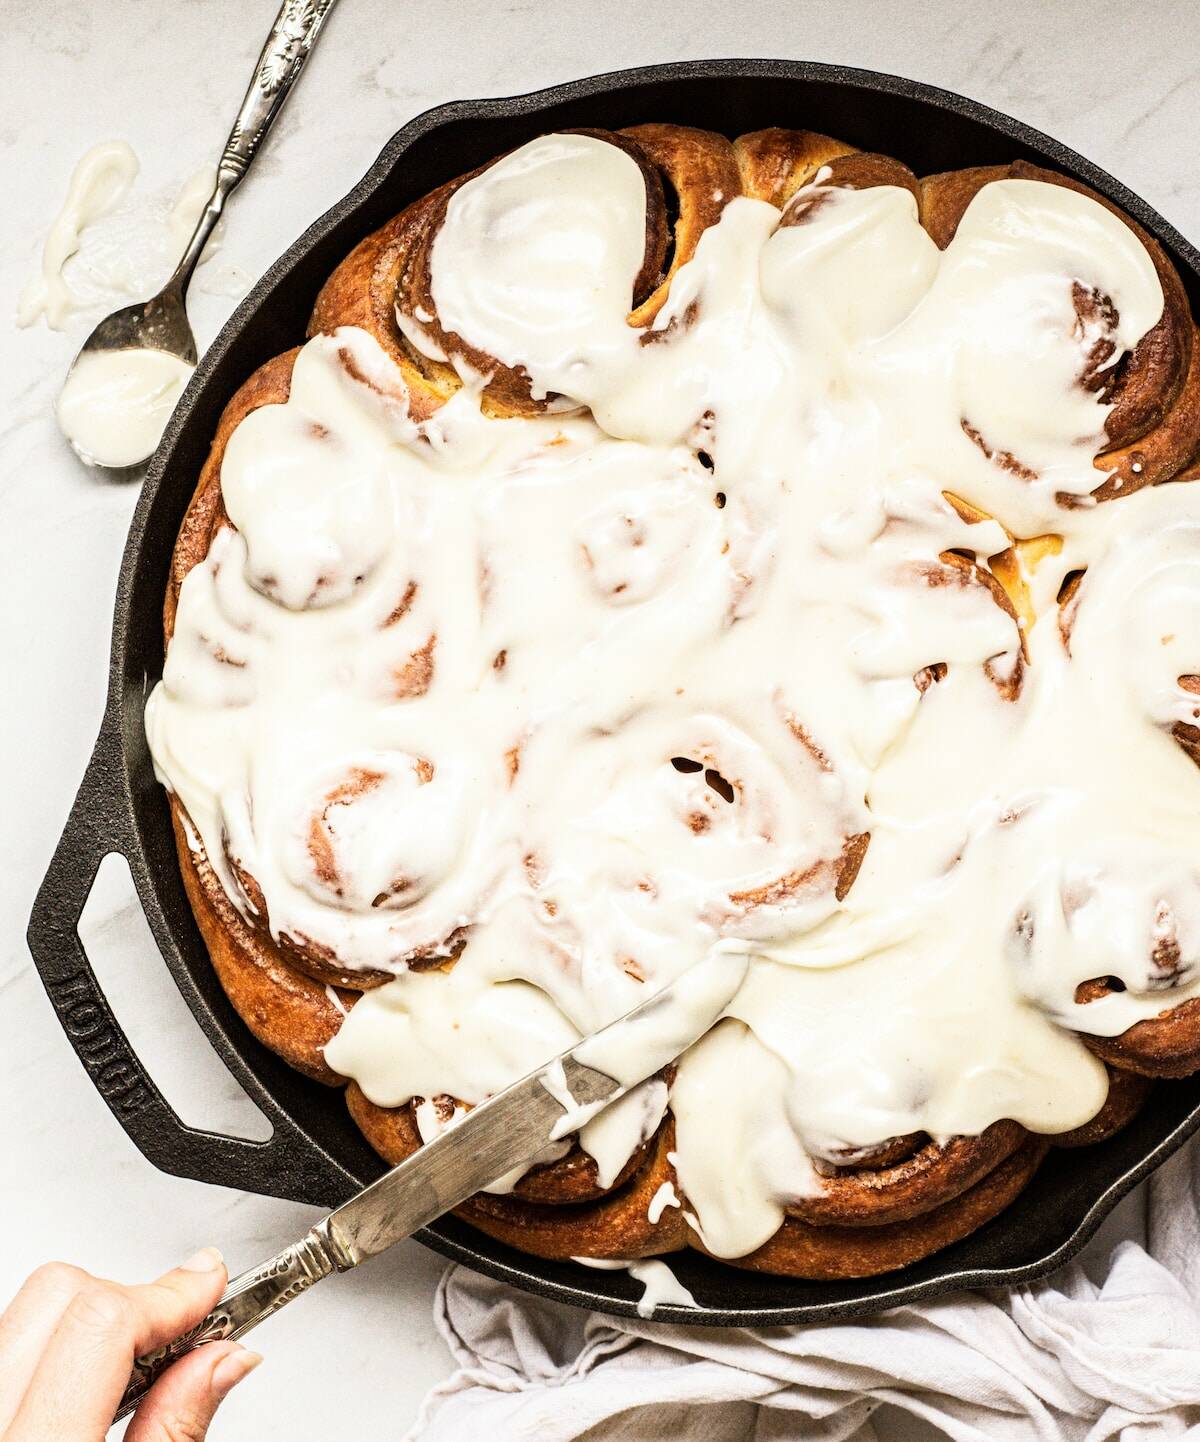 a cast iron pan with baked cinnamon rolls with white icing. A hand is holding a knife and adding on the icing